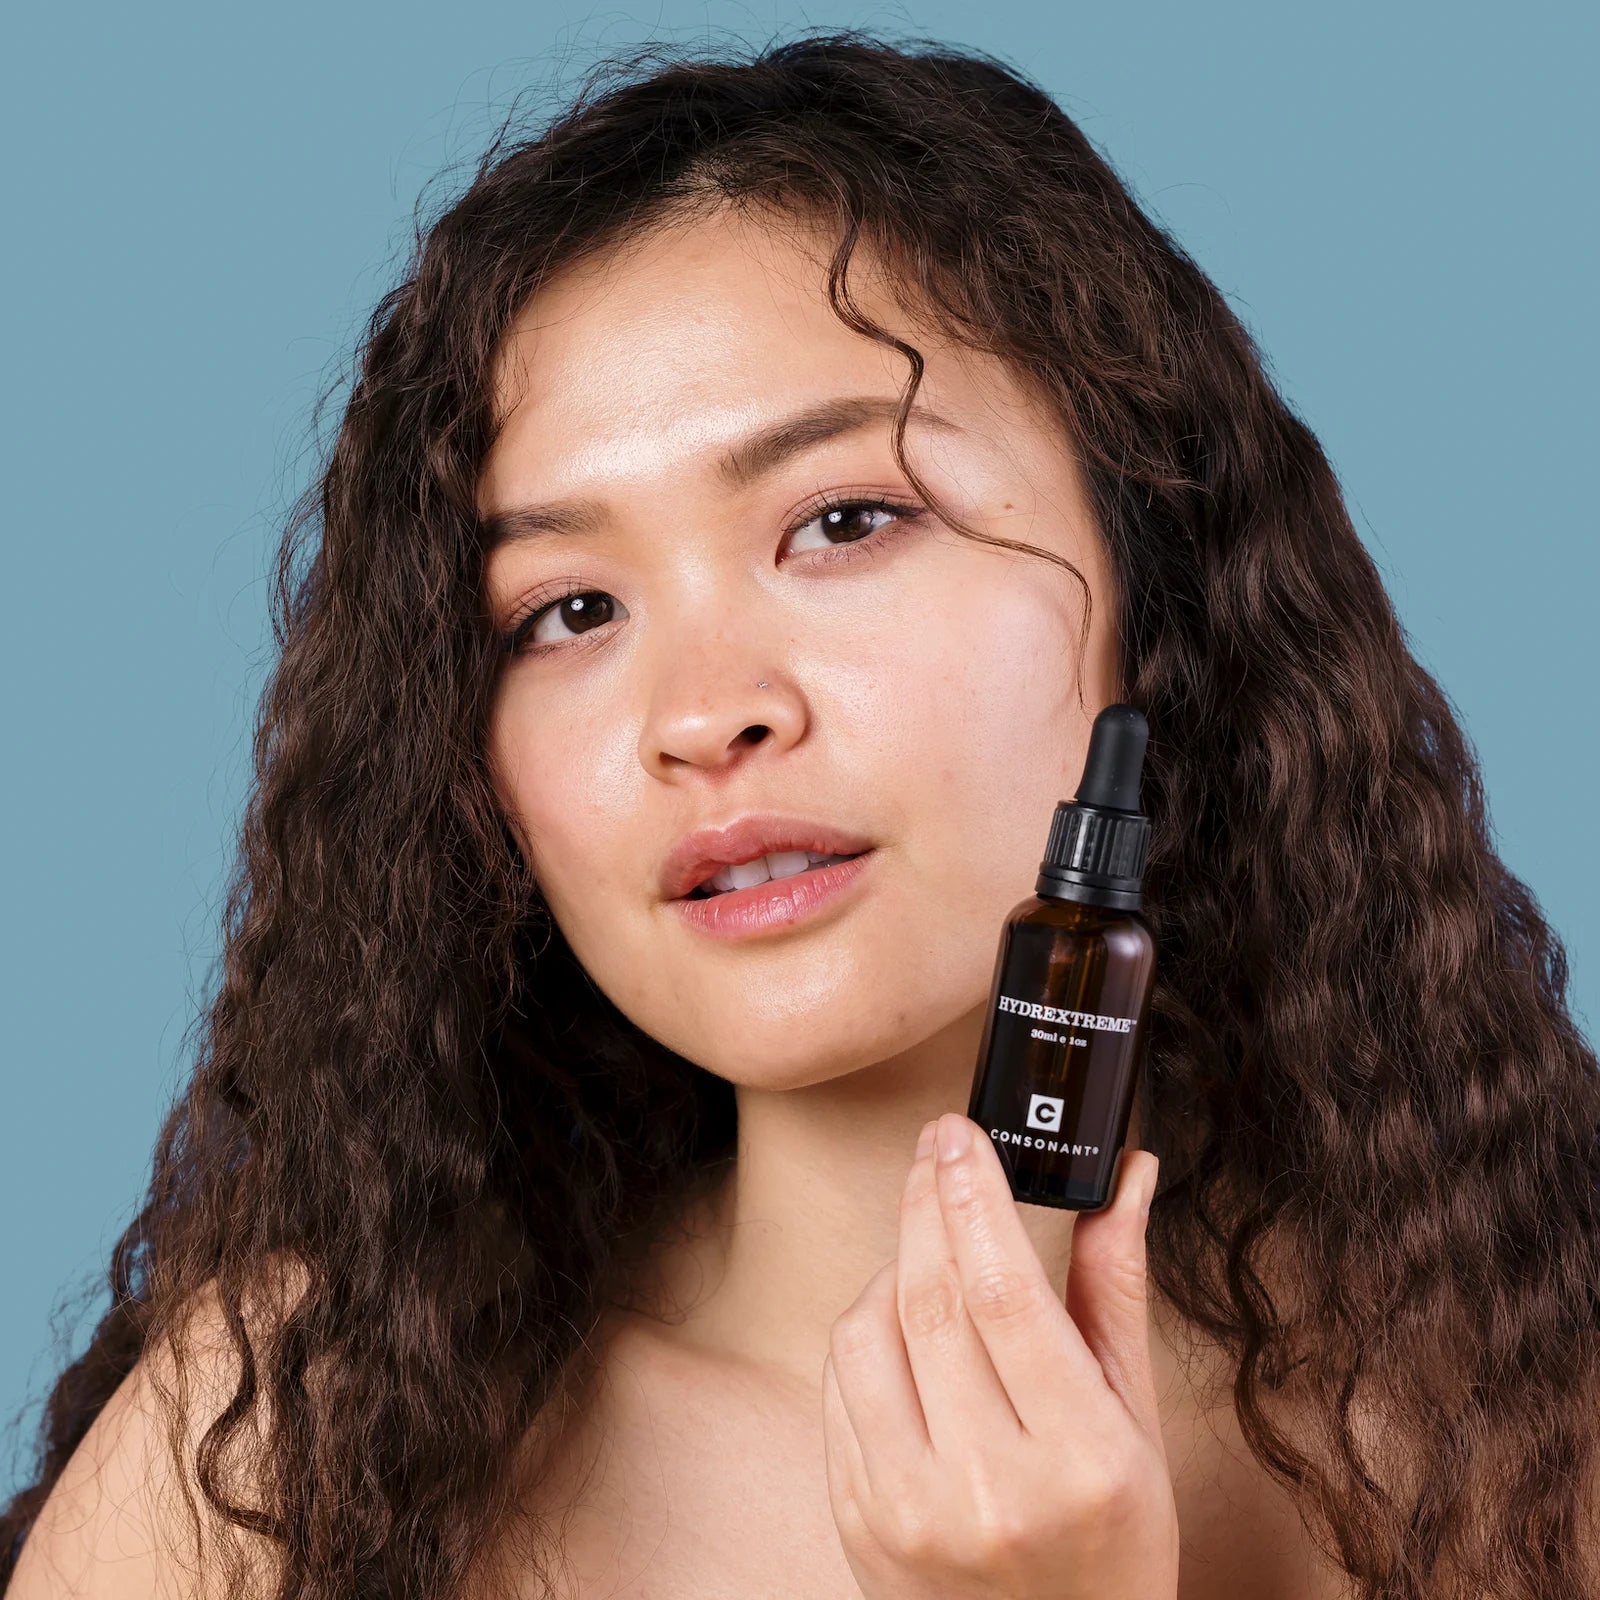 Woman holding all natural, nontoxic facial oil to her face